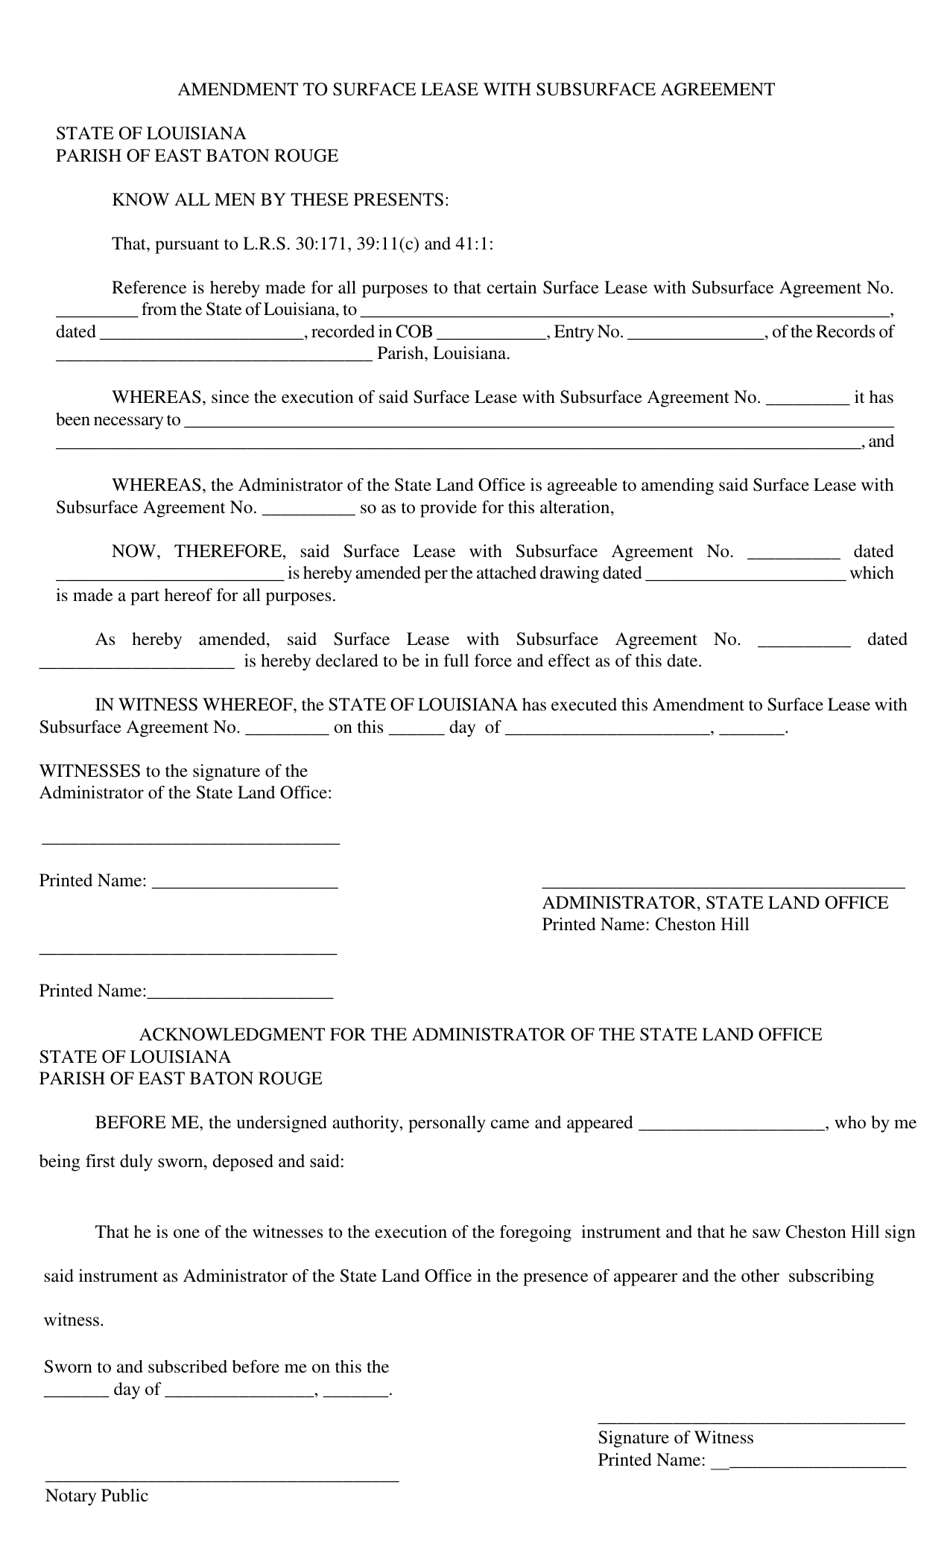 Amendment to Surface Lease With Subsurface Agreement - Louisiana, Page 1